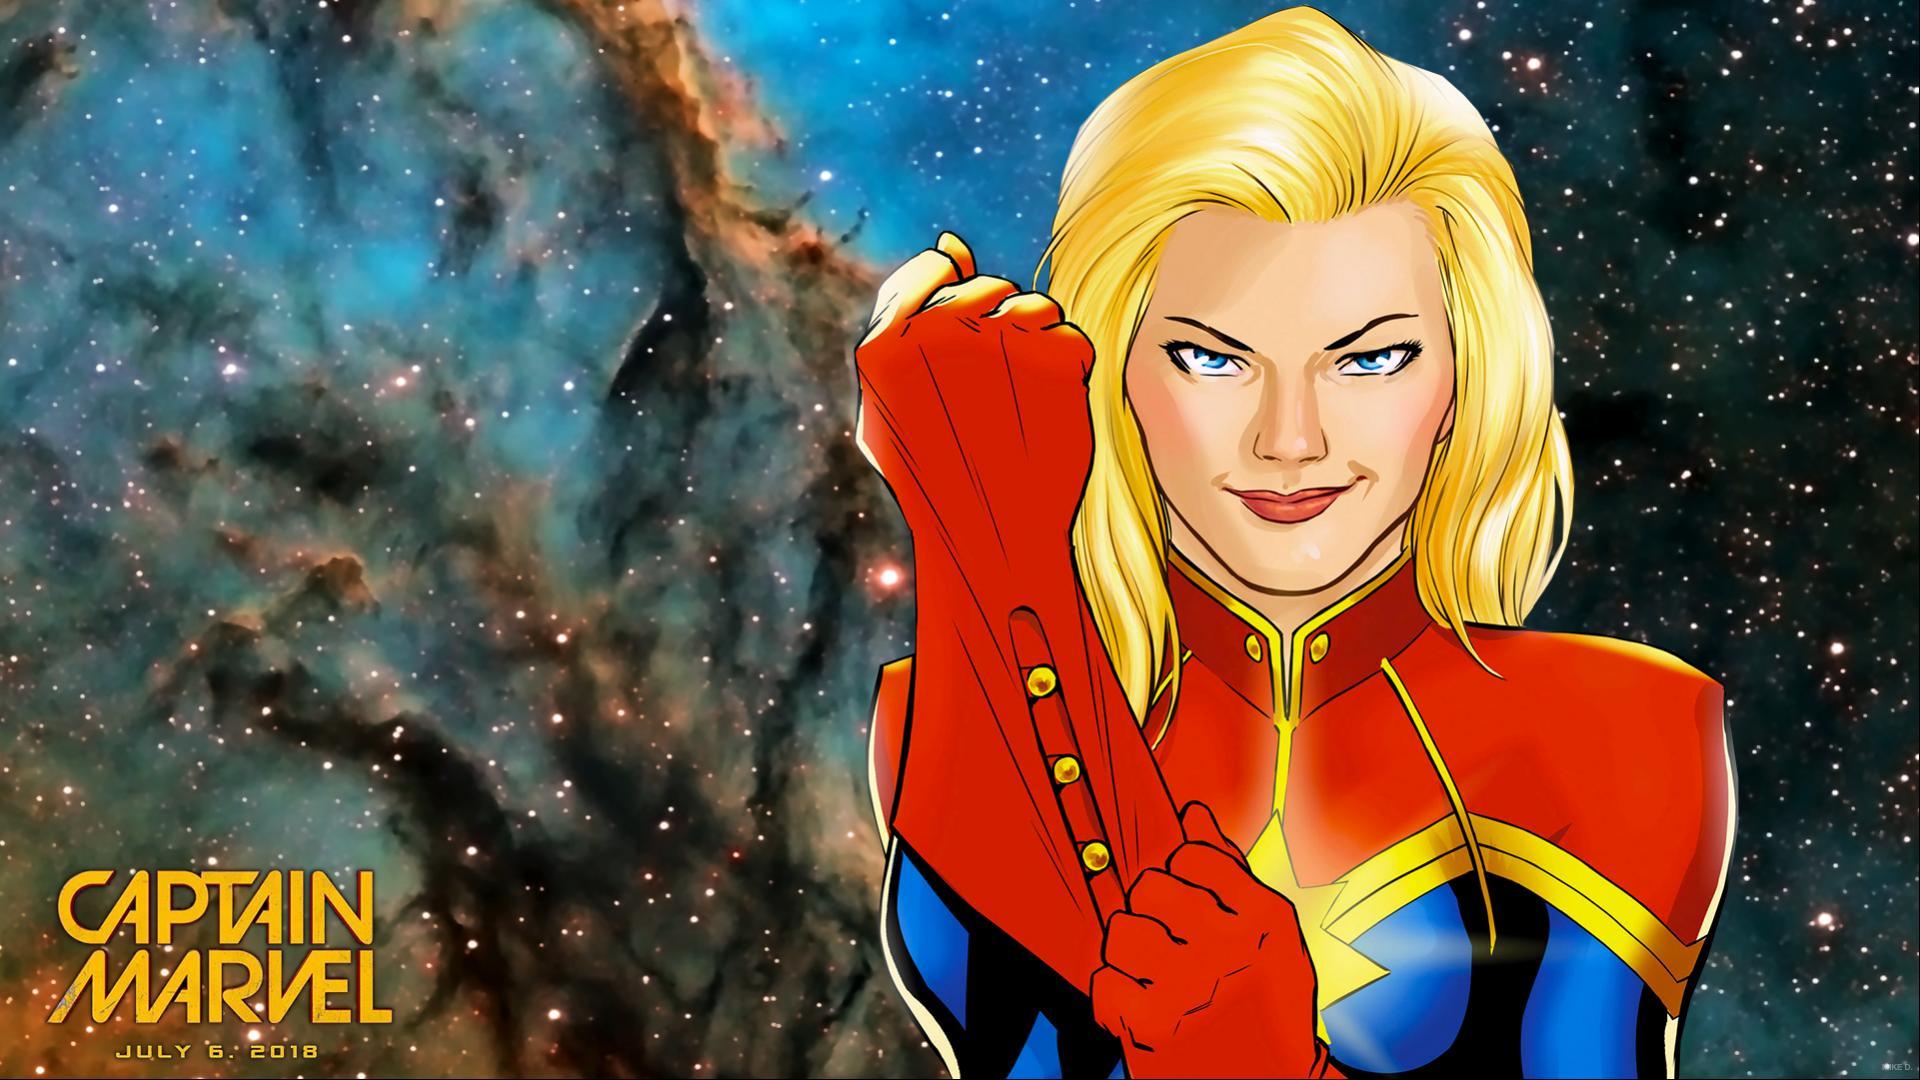 HD Wallpapers 1080p with Superheroes – Captain Marvel